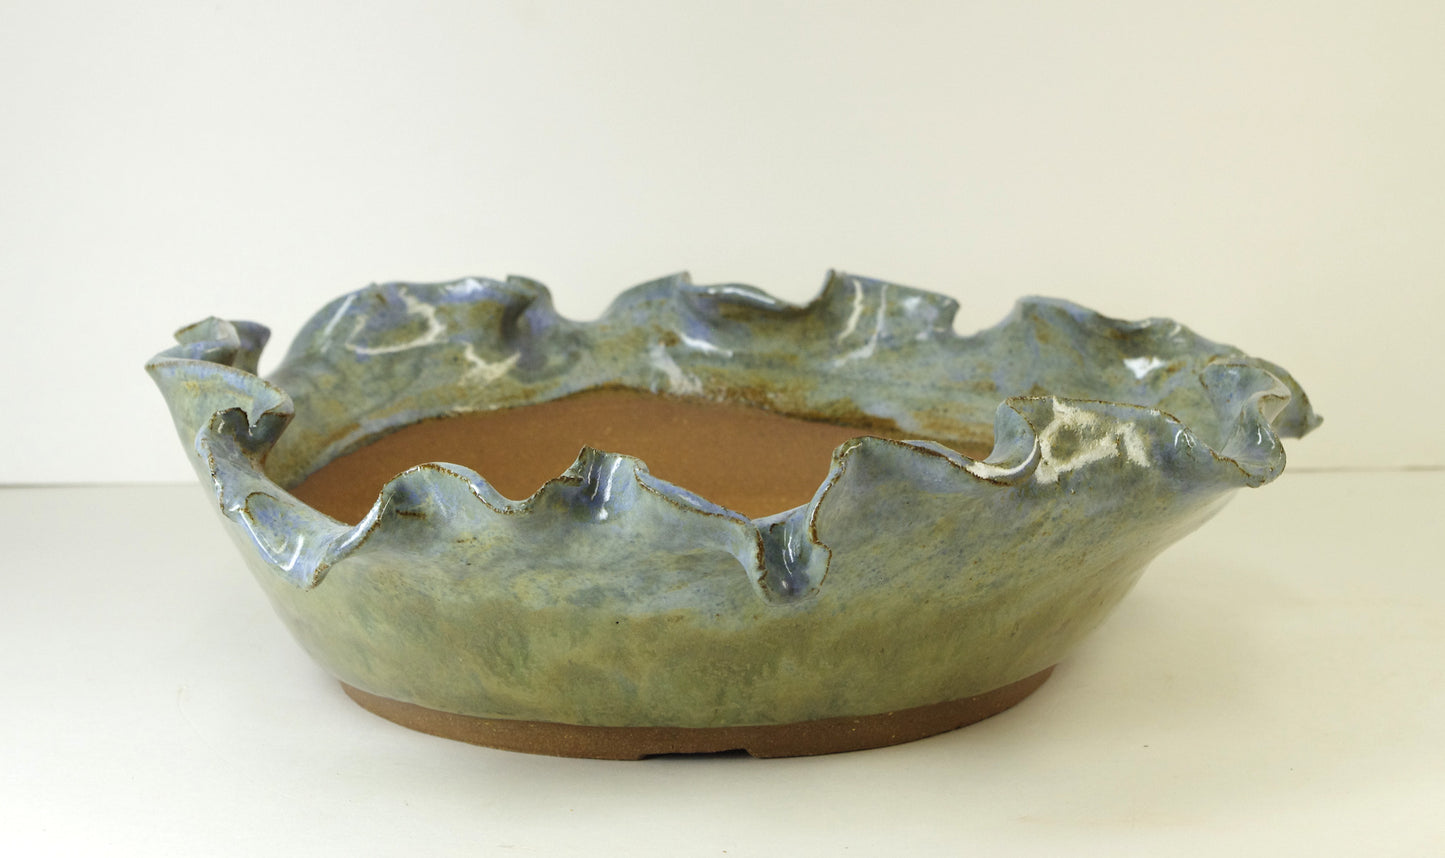 2068, Hand Thrown and Altered Stonware Bonsai Pot, Blues Greens Browns, 11 x 2.5